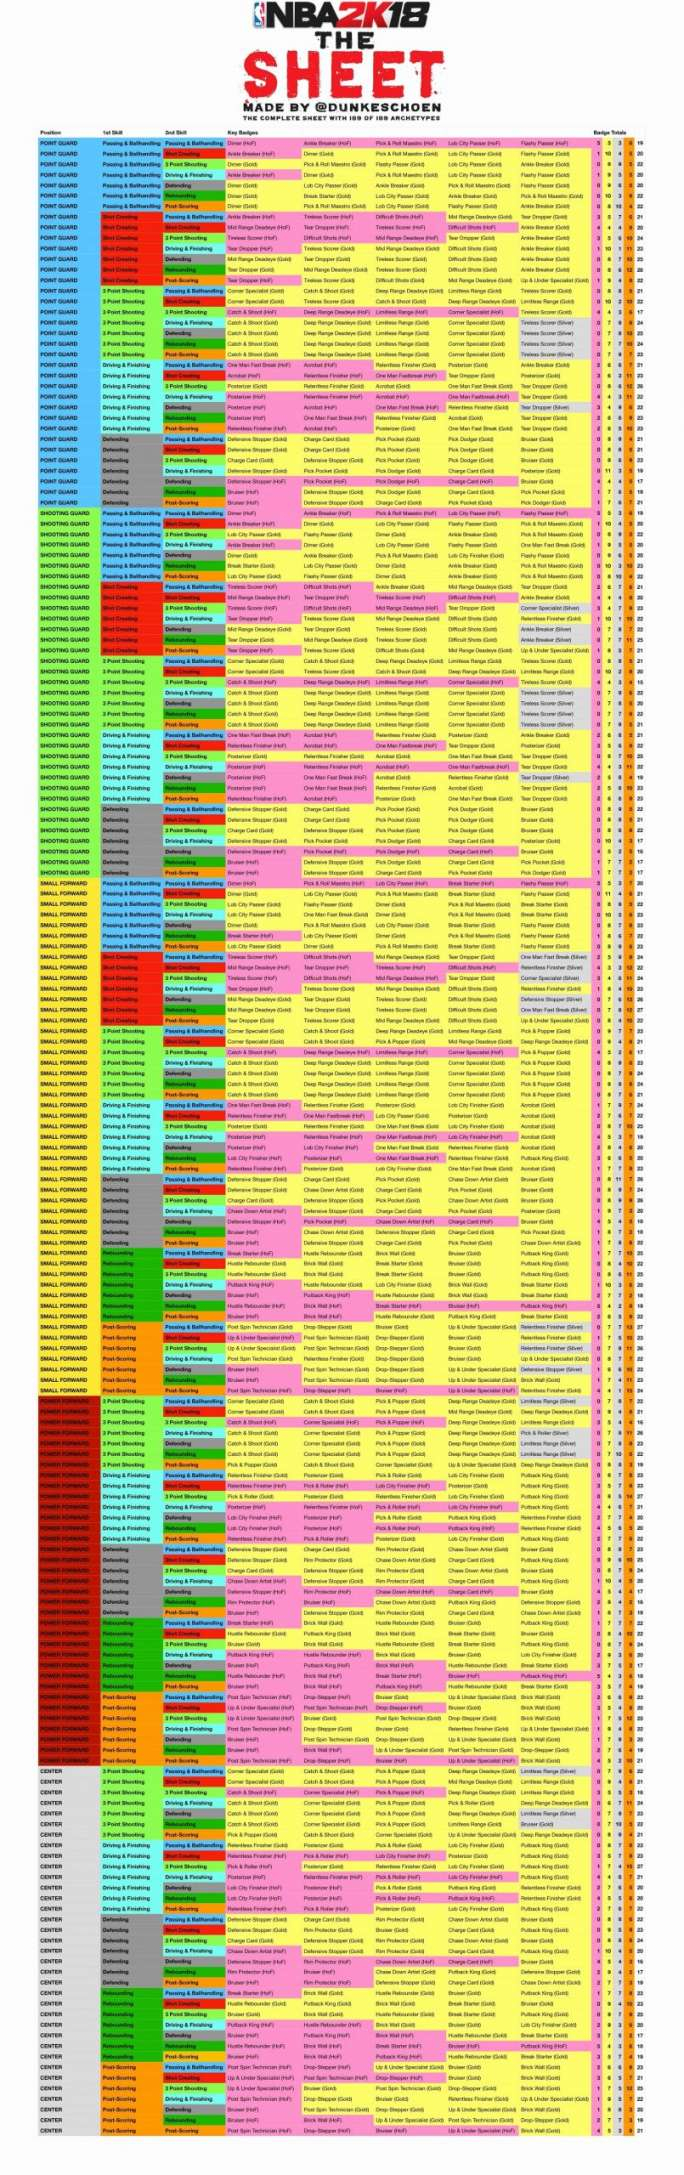 Rocket League Spreadsheet For Xbox For Rocket League Xbox Spreadsheet Online Spreadsheet Spreadsheet For